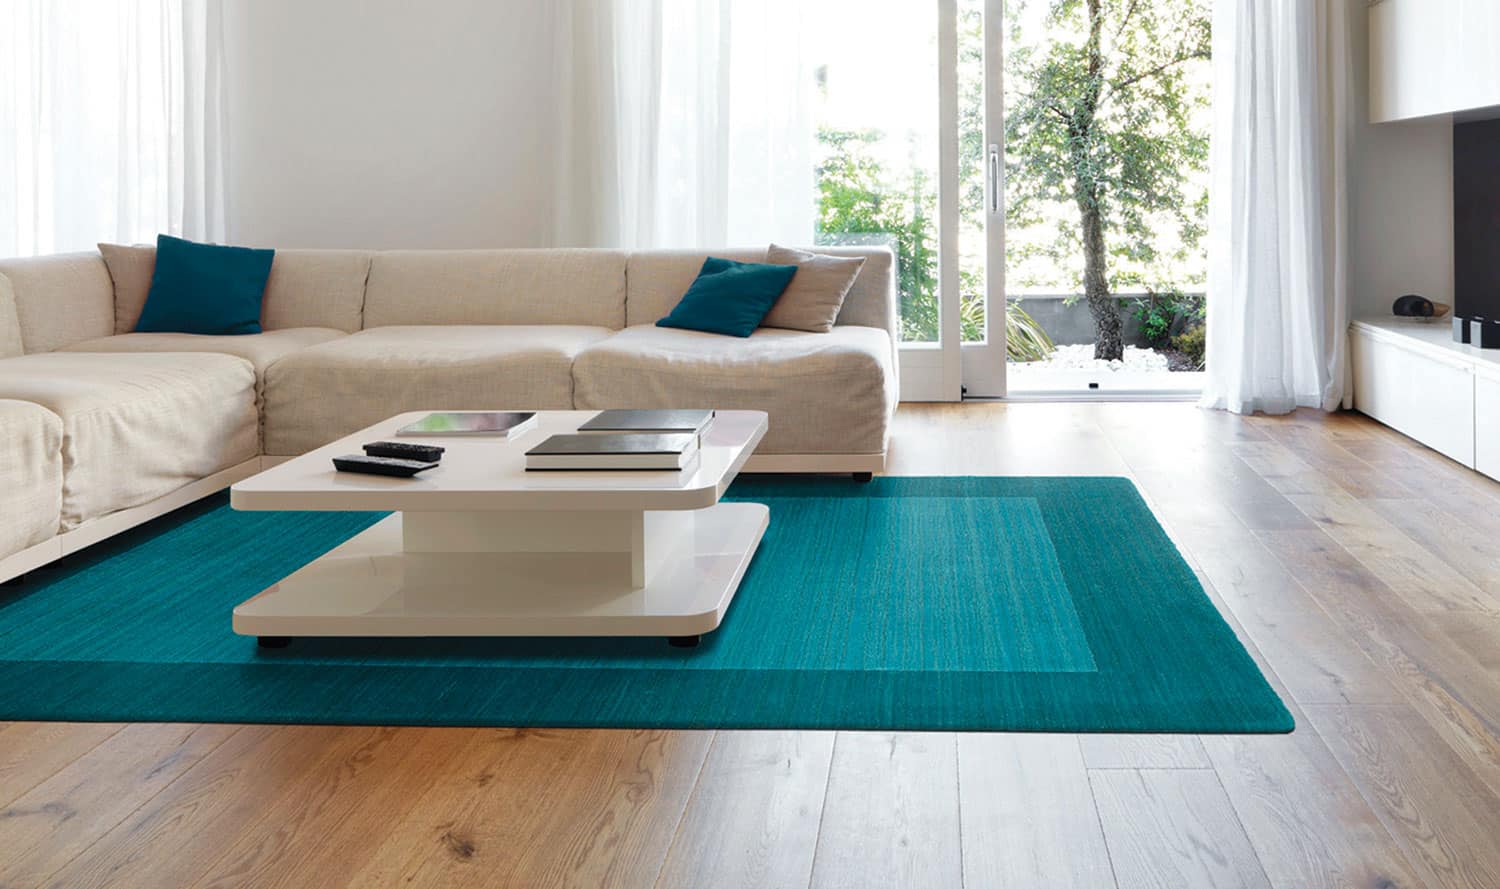 A statement rug doesn’t have to have pattern instead you can choose a statement rug that is in a bold color.